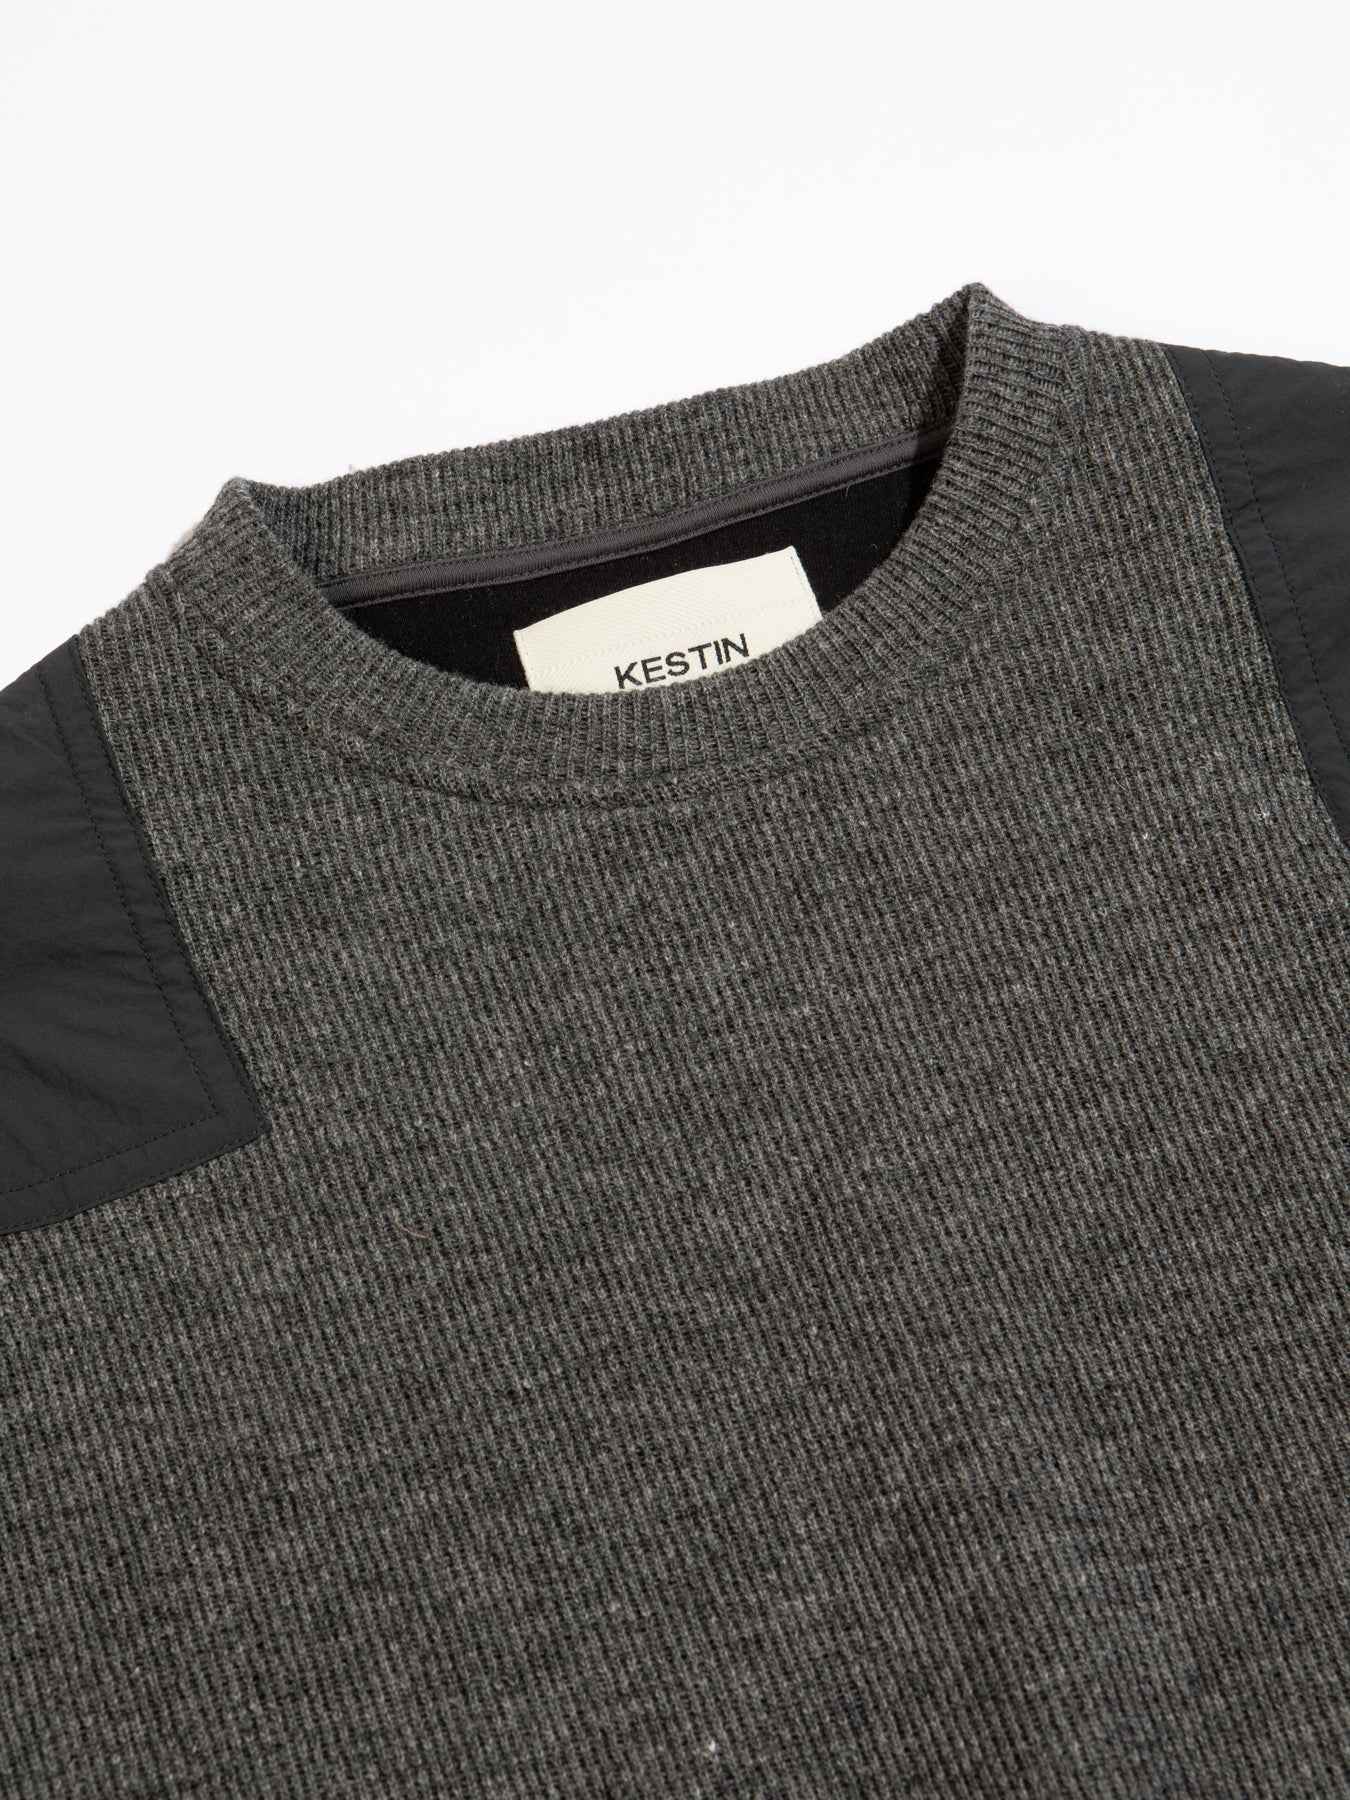 A ribbed crew neck and shoulder panels, on a premium knitted sweater by menswear designer KESTIN.